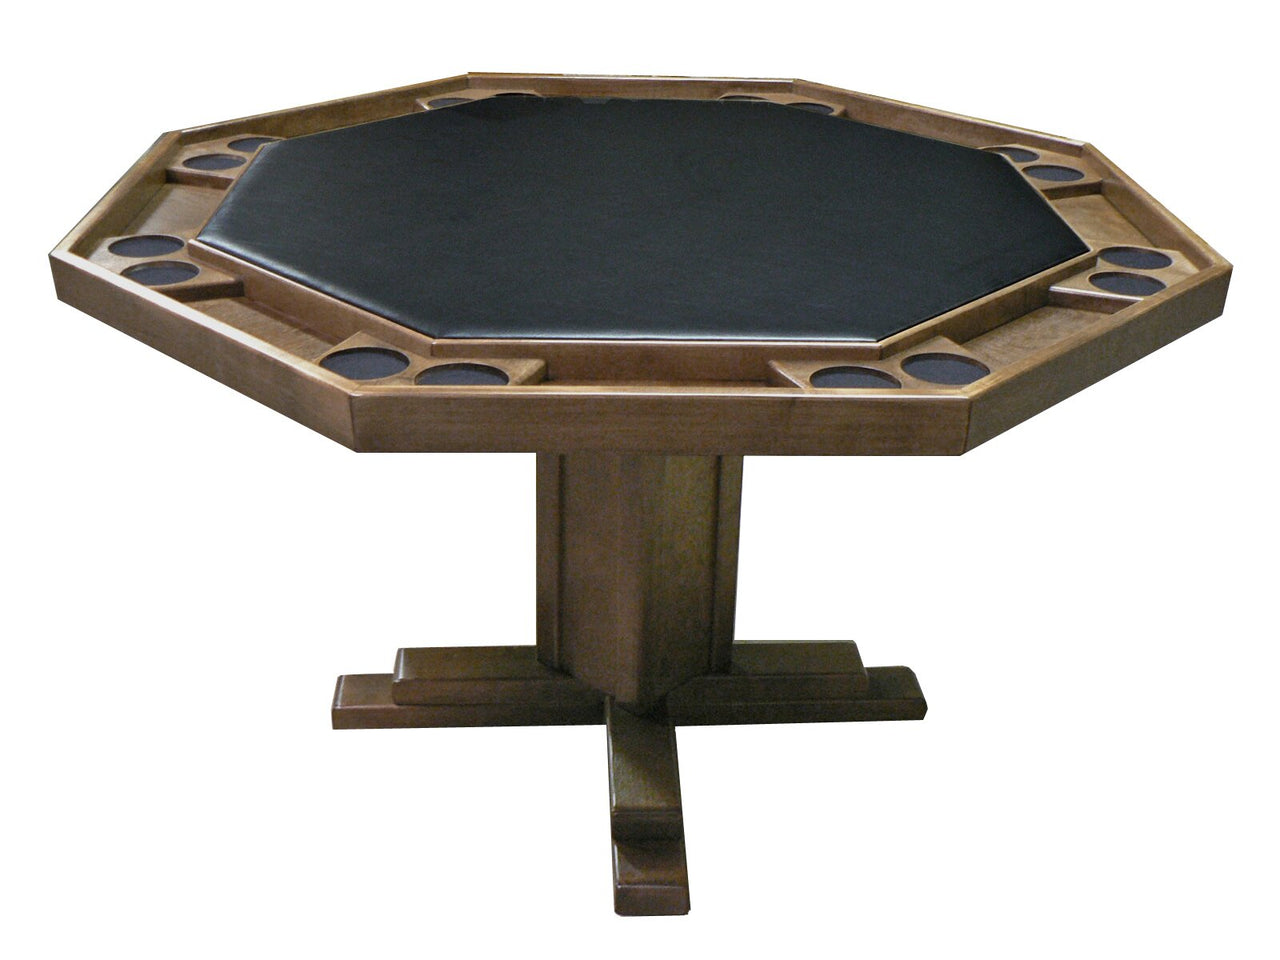 Octagonal Poker Table with Chairs, 8-person, Oak, Pedestal Base, by Kestell